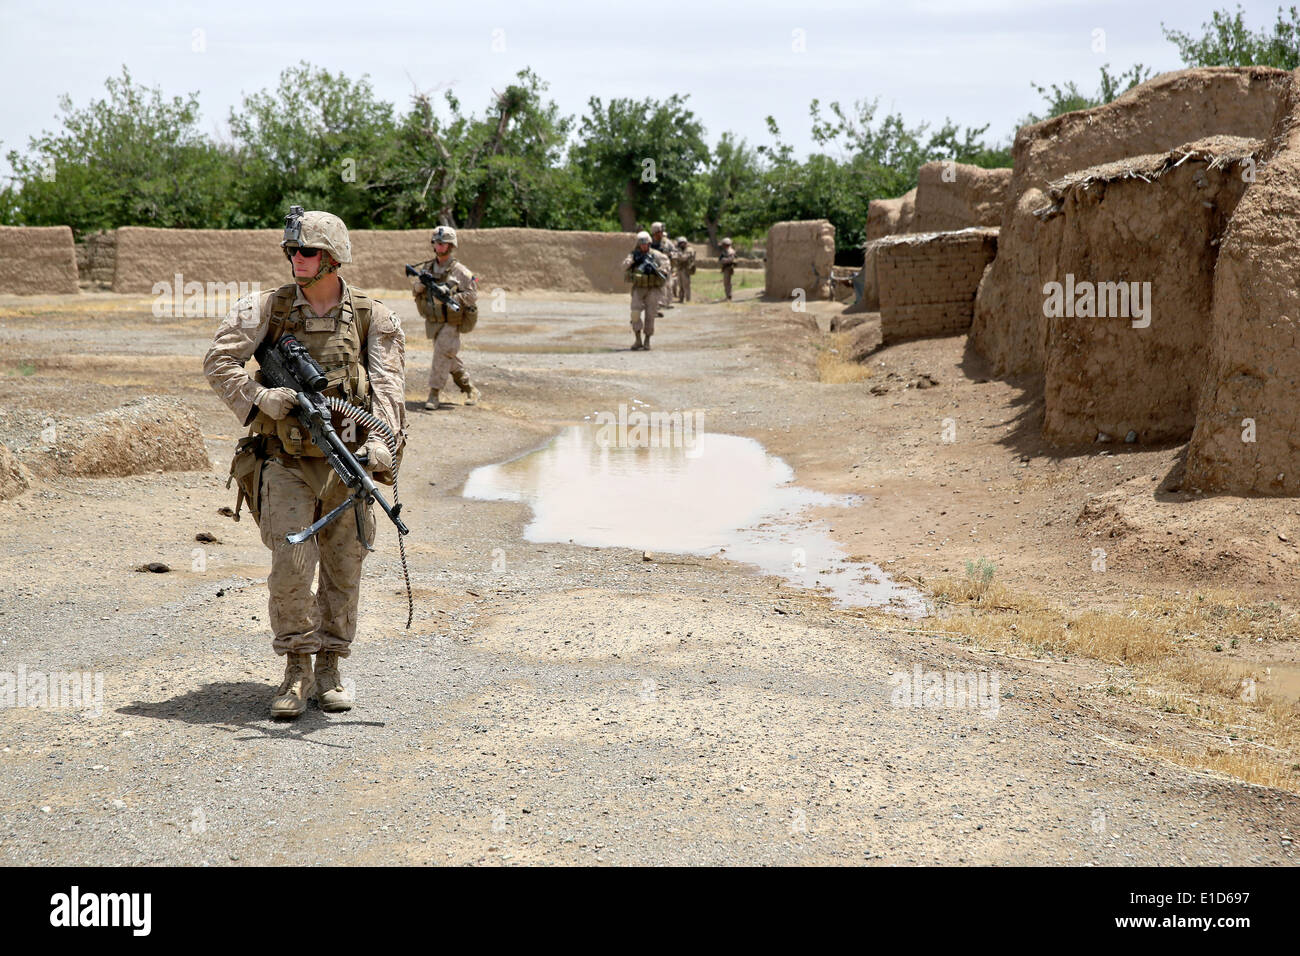 US Marines with the 1st Battalion, 7th Marine Regiment, patrol during a a counter-insurgency mission May 16, 2014 in Larr Village, Helmand province, Afghanistan. Stock Photo